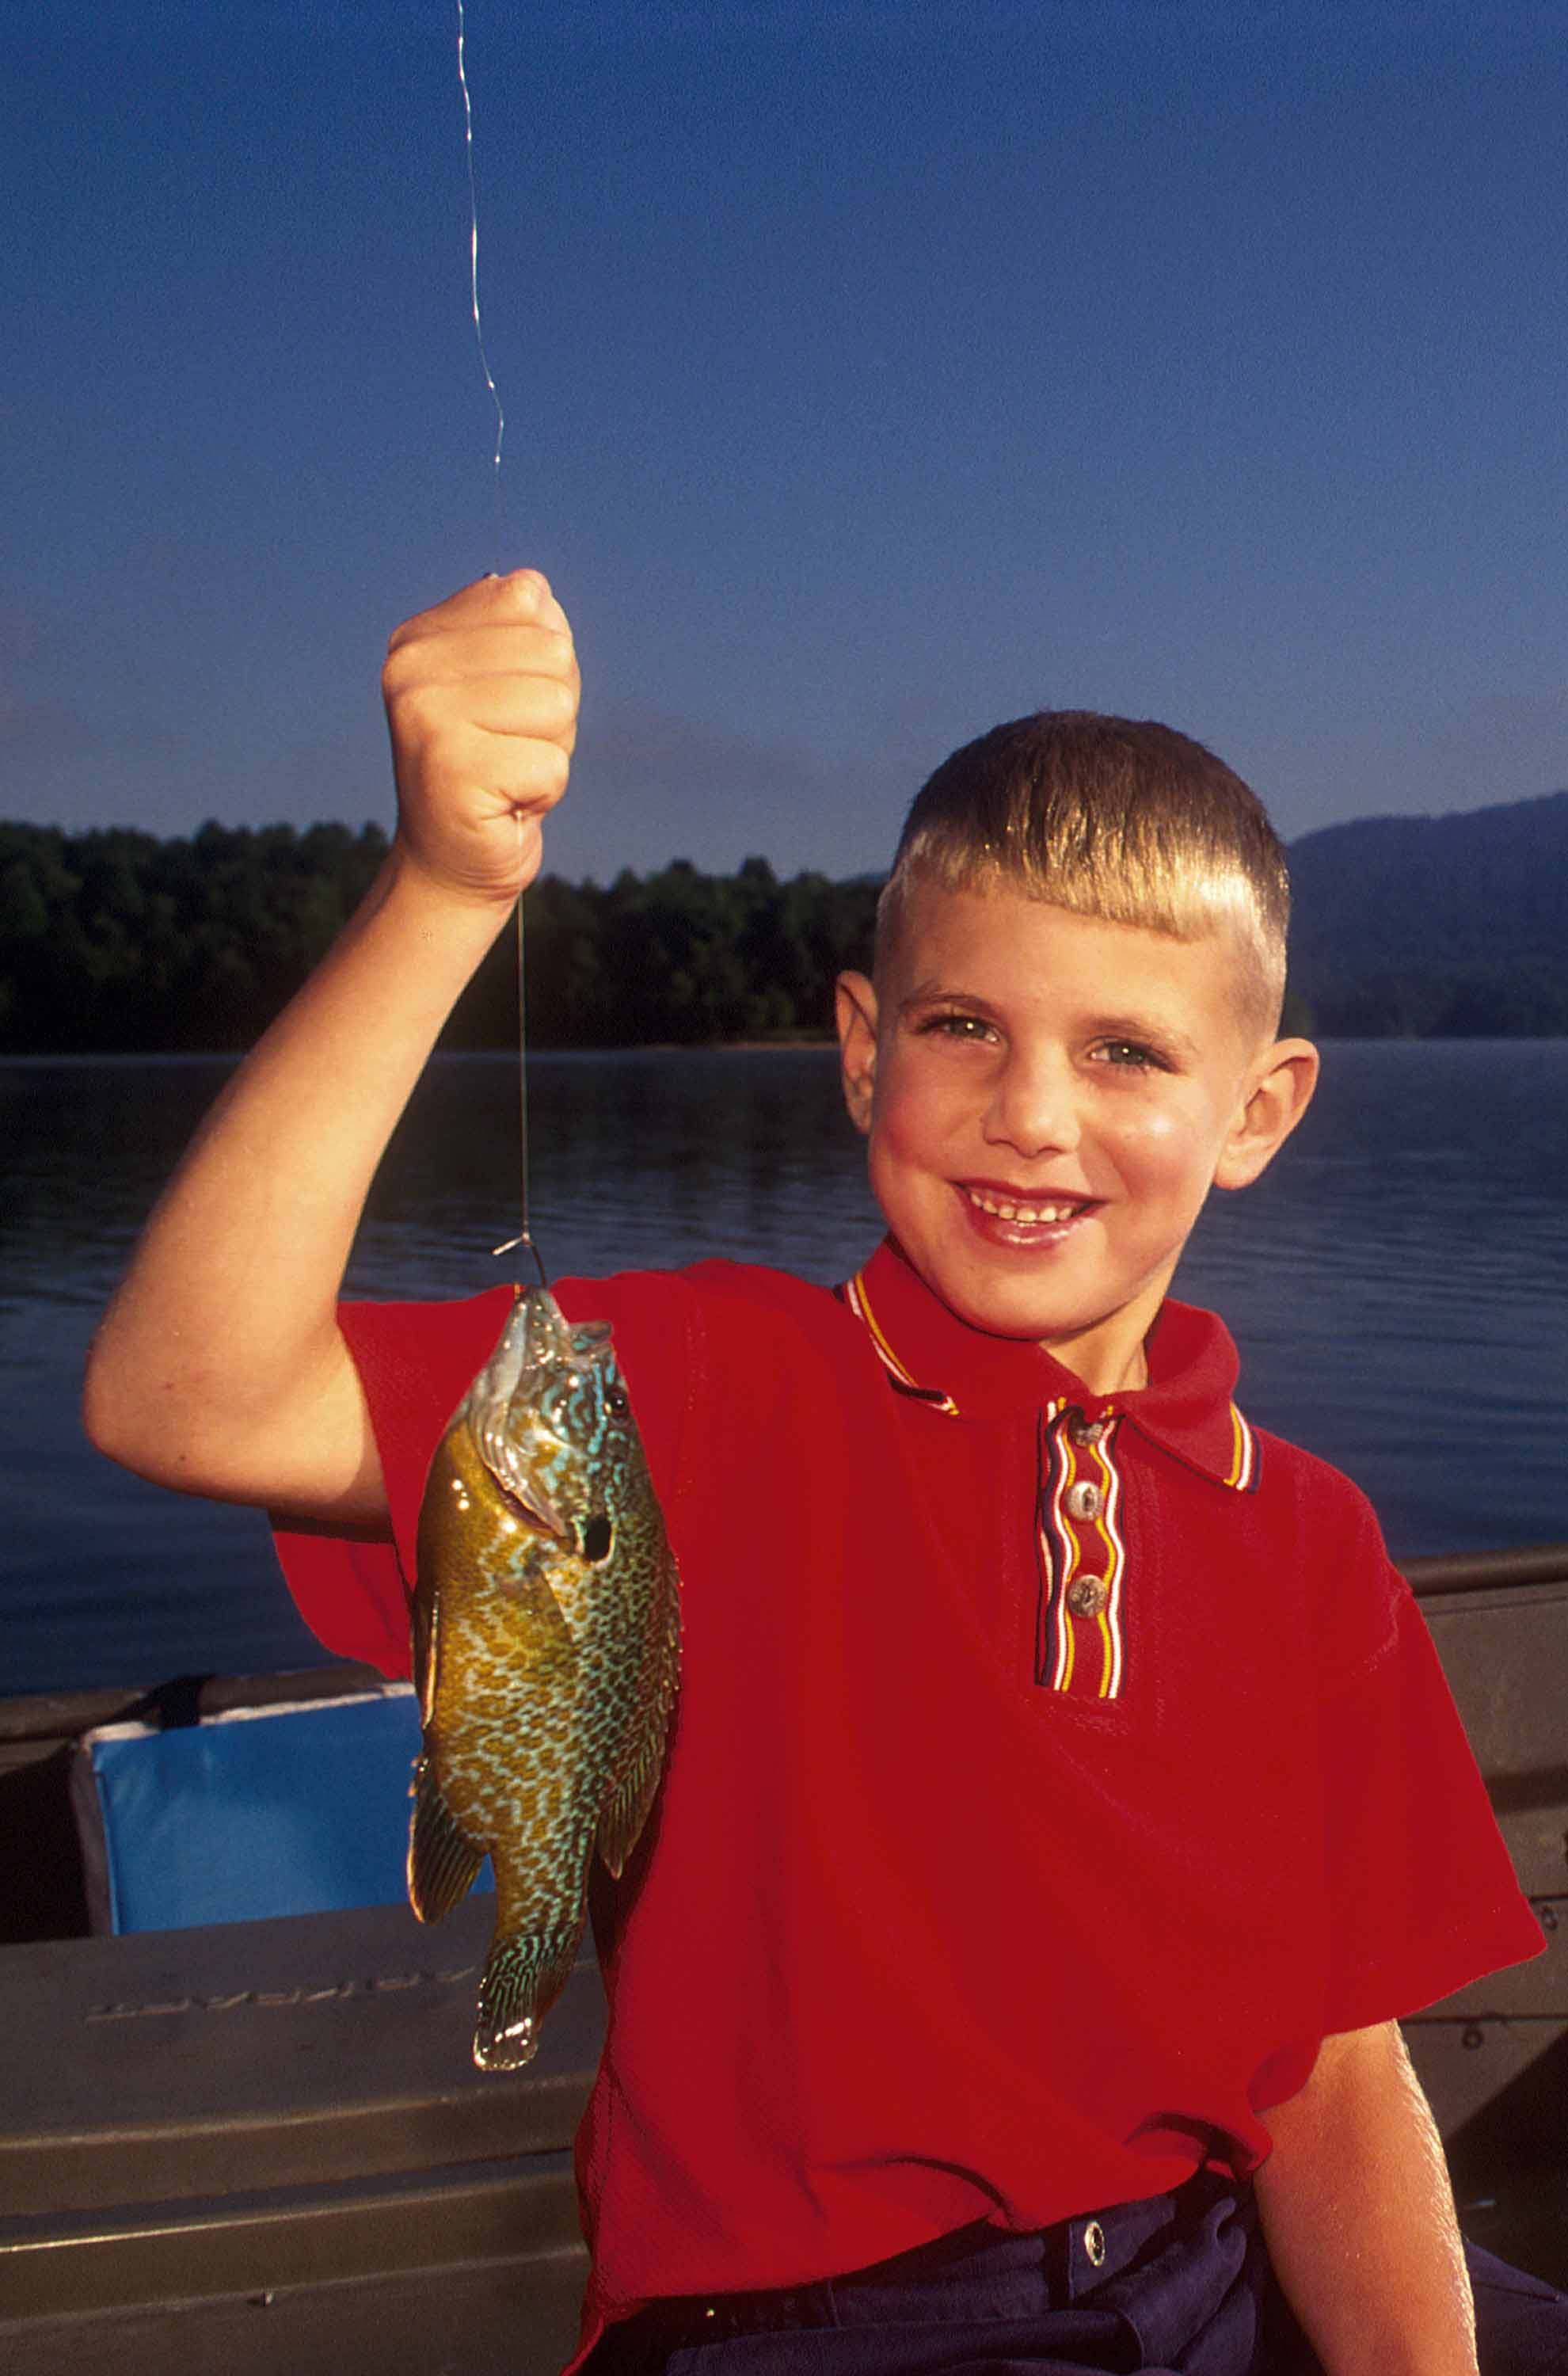 Photo Courtesy of the West Virginia Department of Commerce.   Adults and children are encouraged to try fishing during West Virginia’s Free Fishing Days June 7 and 8, when they can fish without a lice